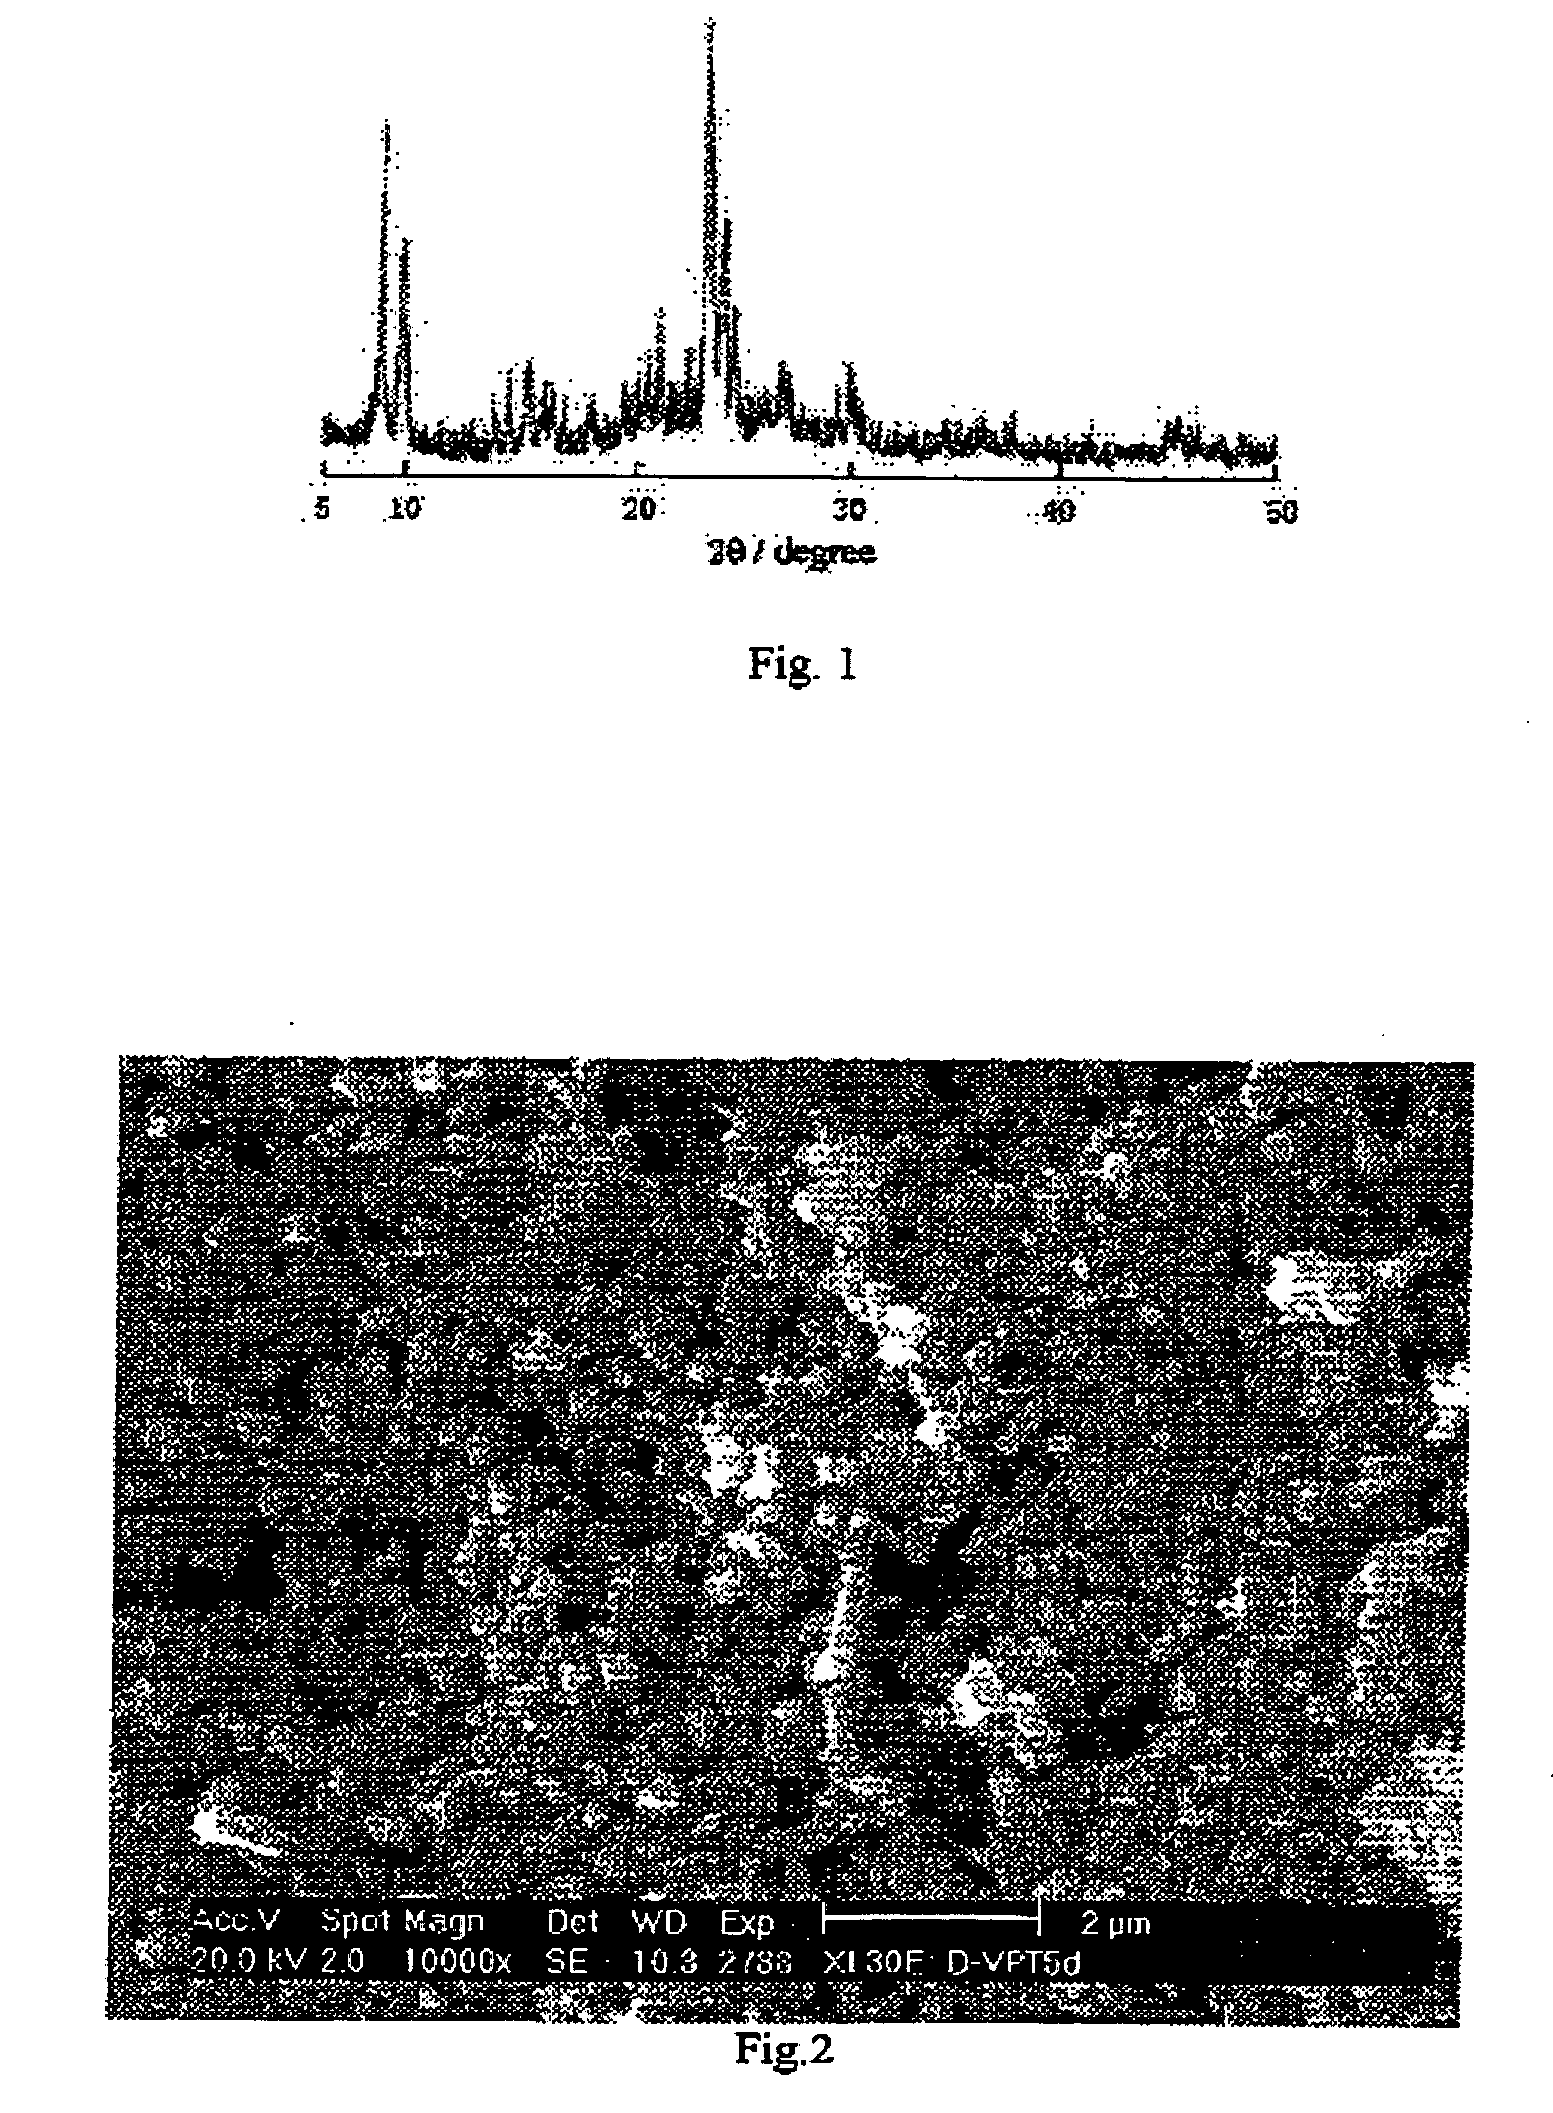 Process for producing binder-free ZSM-5 zeolite in small crystal size